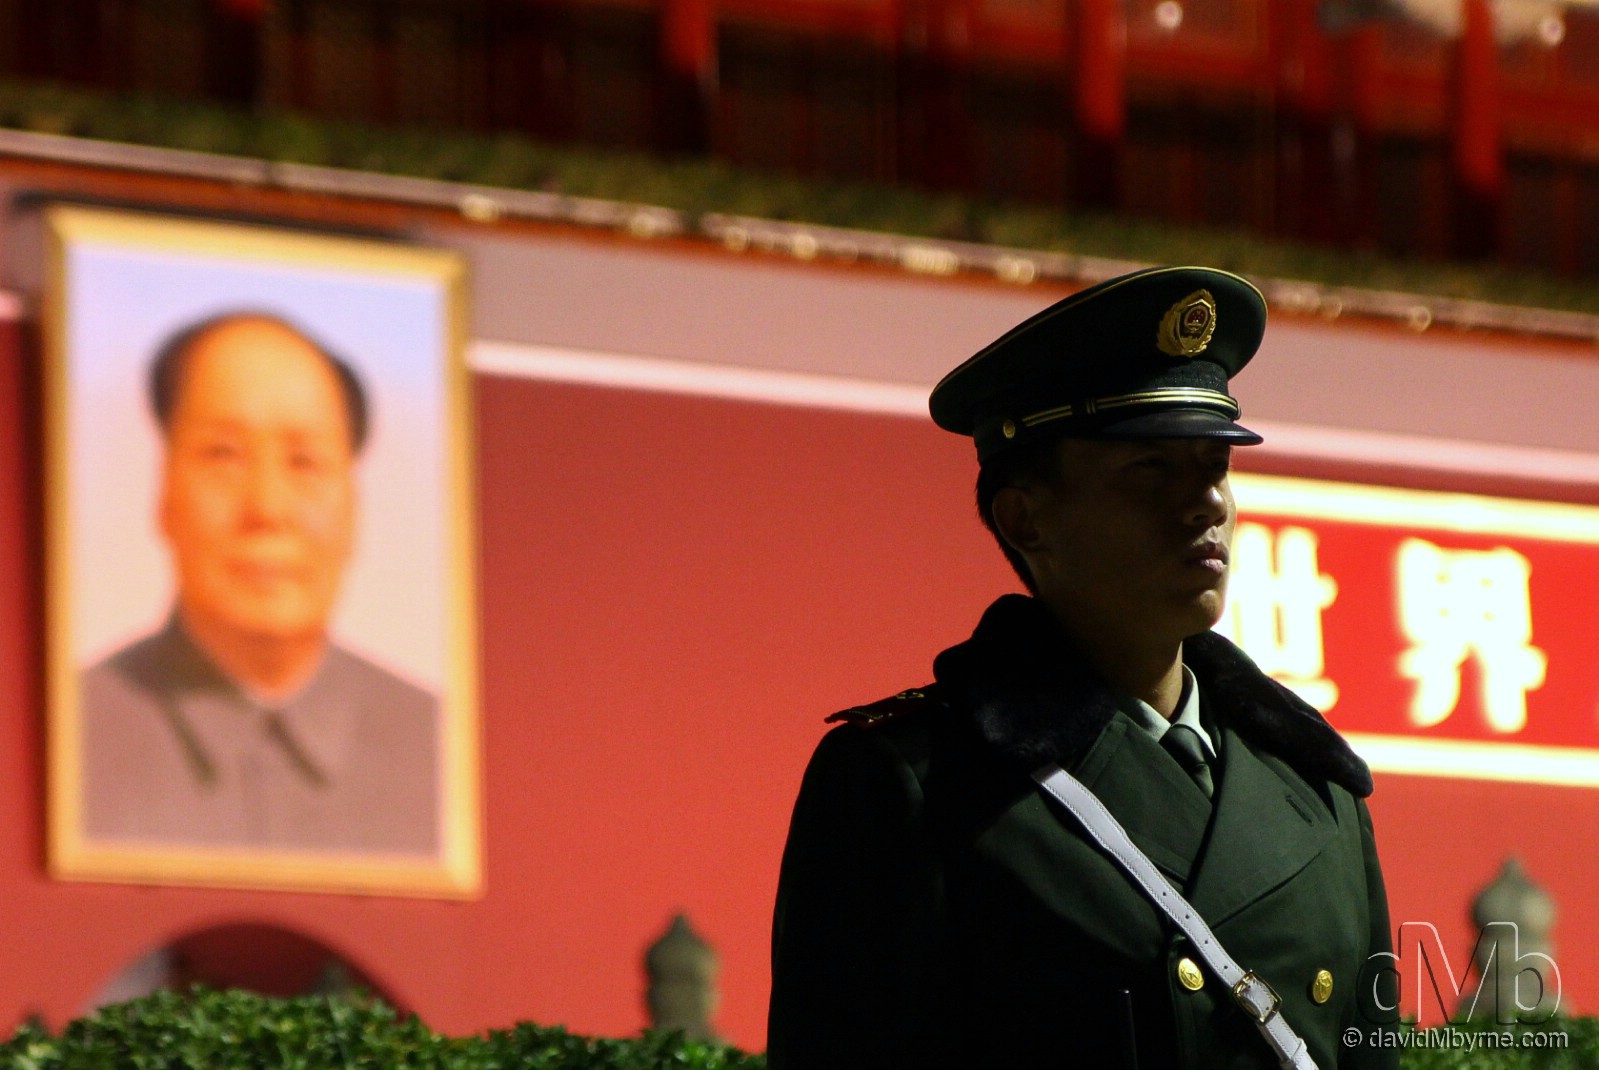 Standing guard outside of Tian'anmen Gate, Beijing, China. October 27th, 2012 (EOS 60D || Tamron 28-75mm || 75mm, 1/125sec, f/3.2, iso1250)